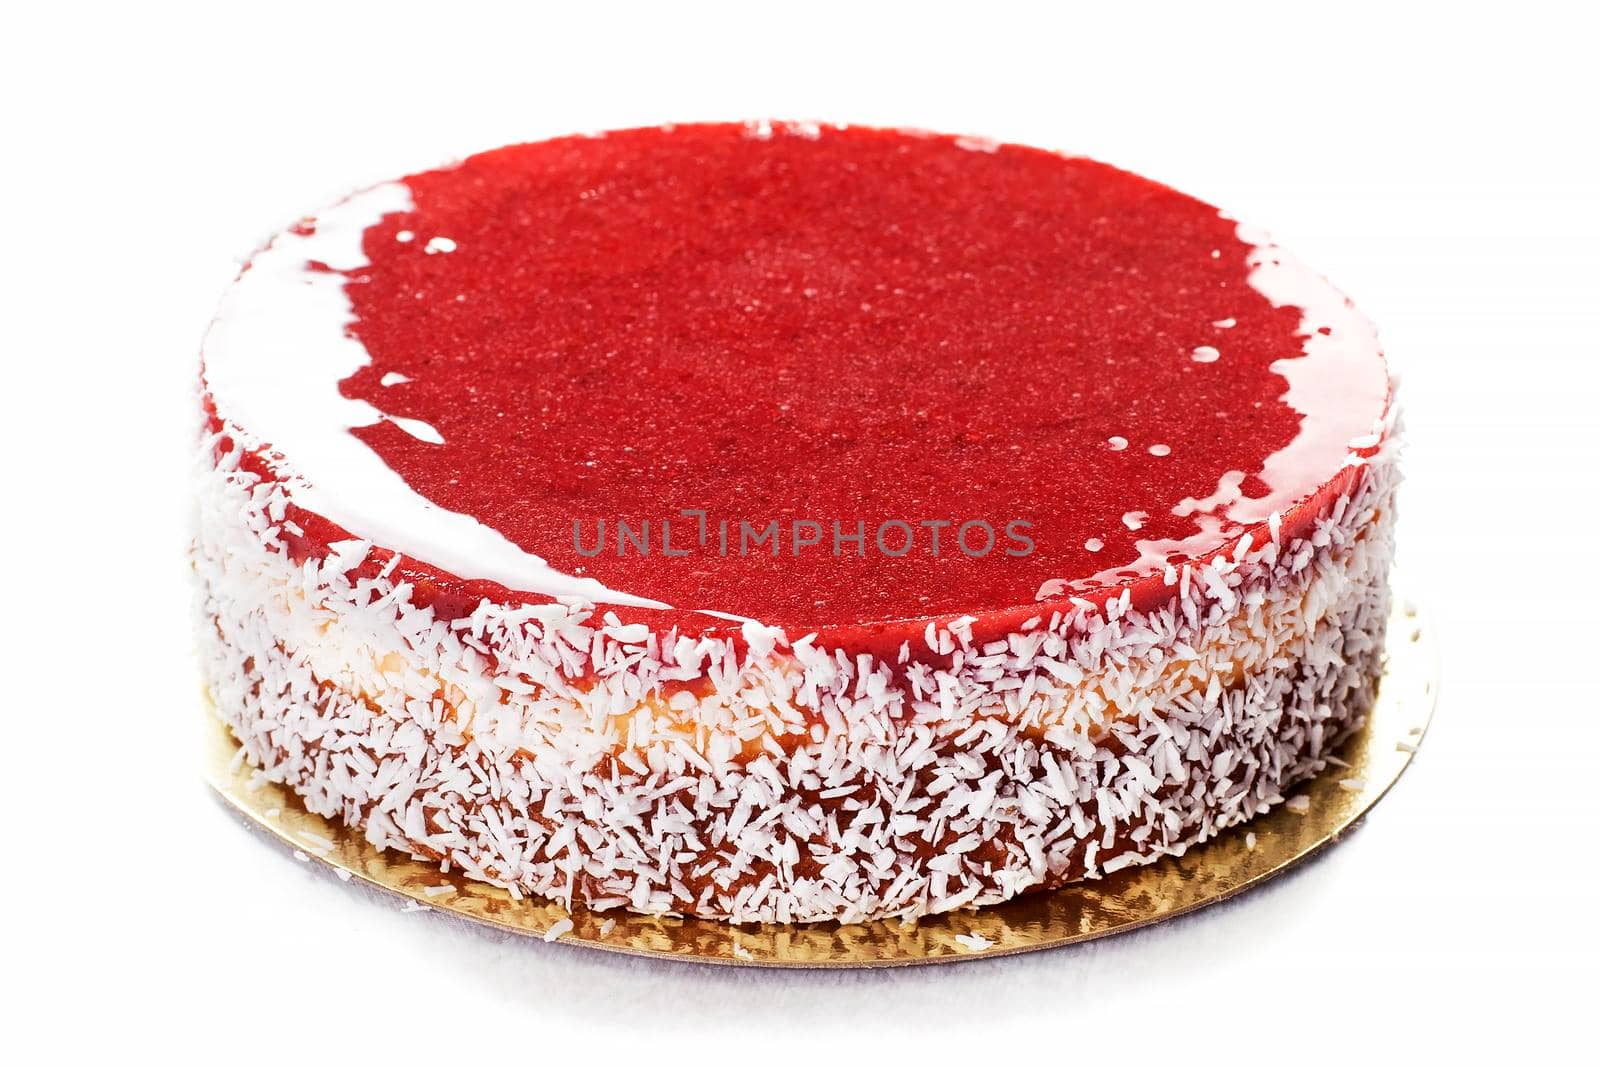 Pastry. Strawberry Cake with Jellies. Isolated on white - Stock image.